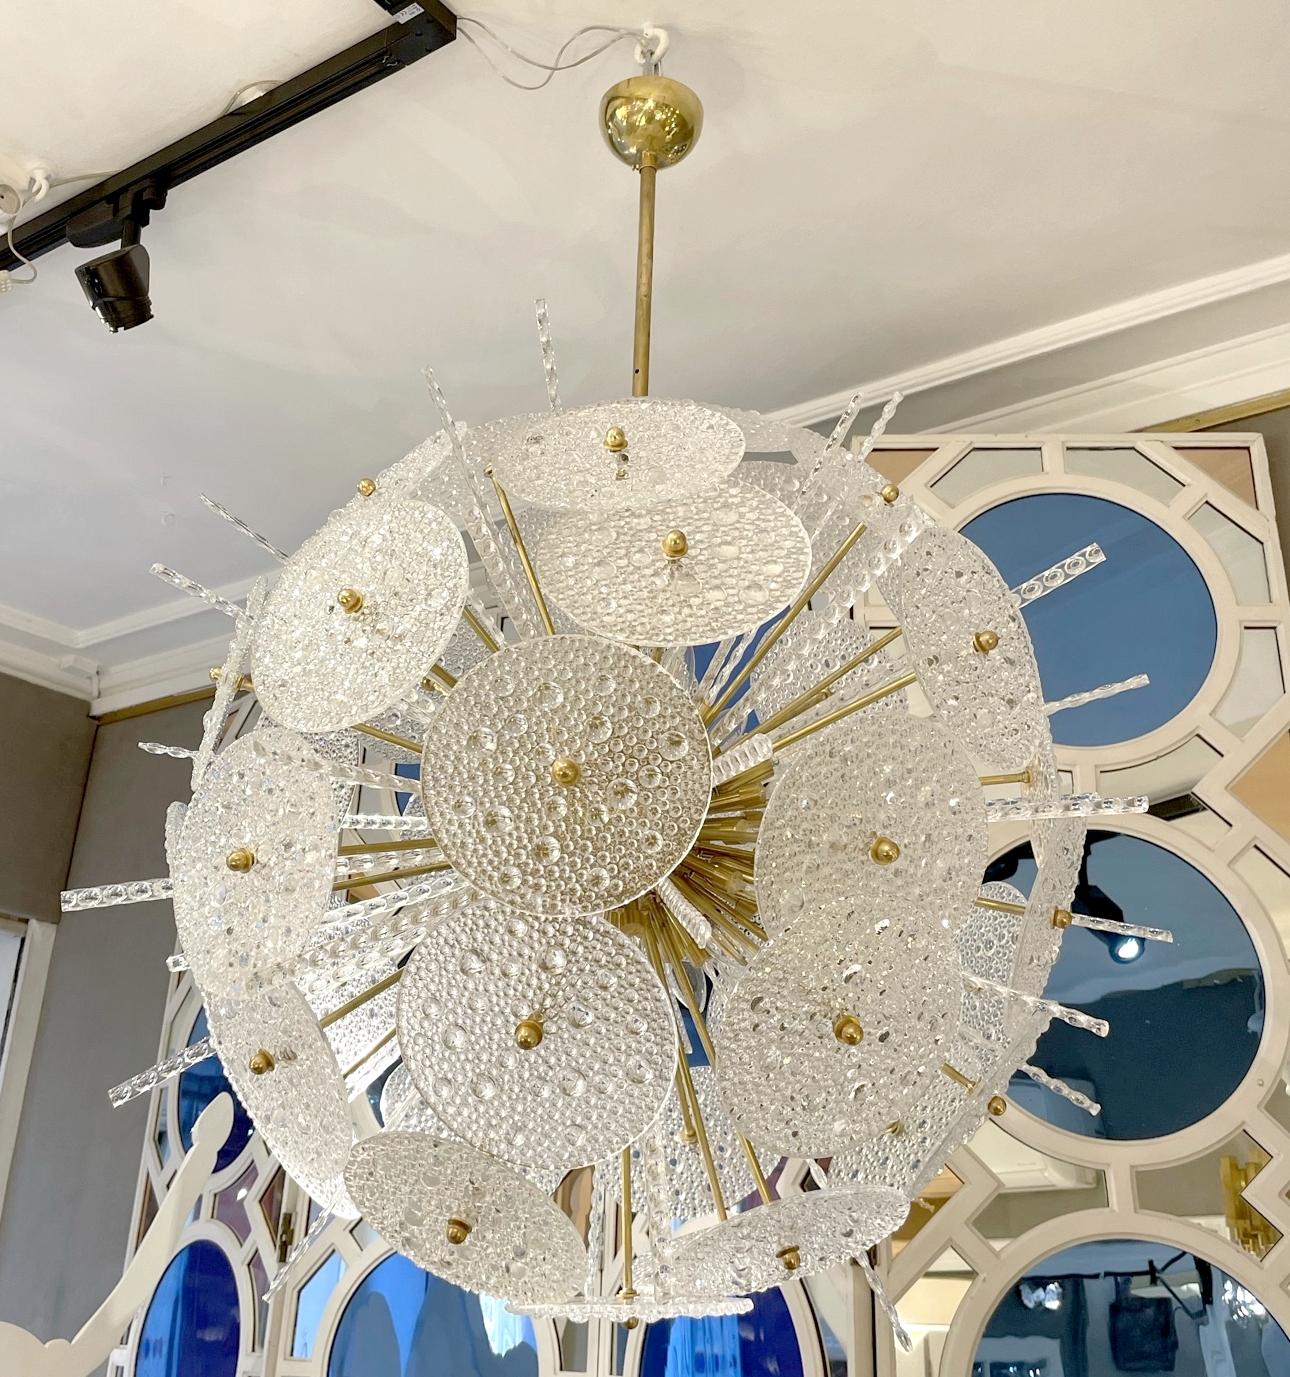 Murano glass and brass chandelier.
A structure made up of a sphere and brass rods supports frosted glass disks decorated with small 